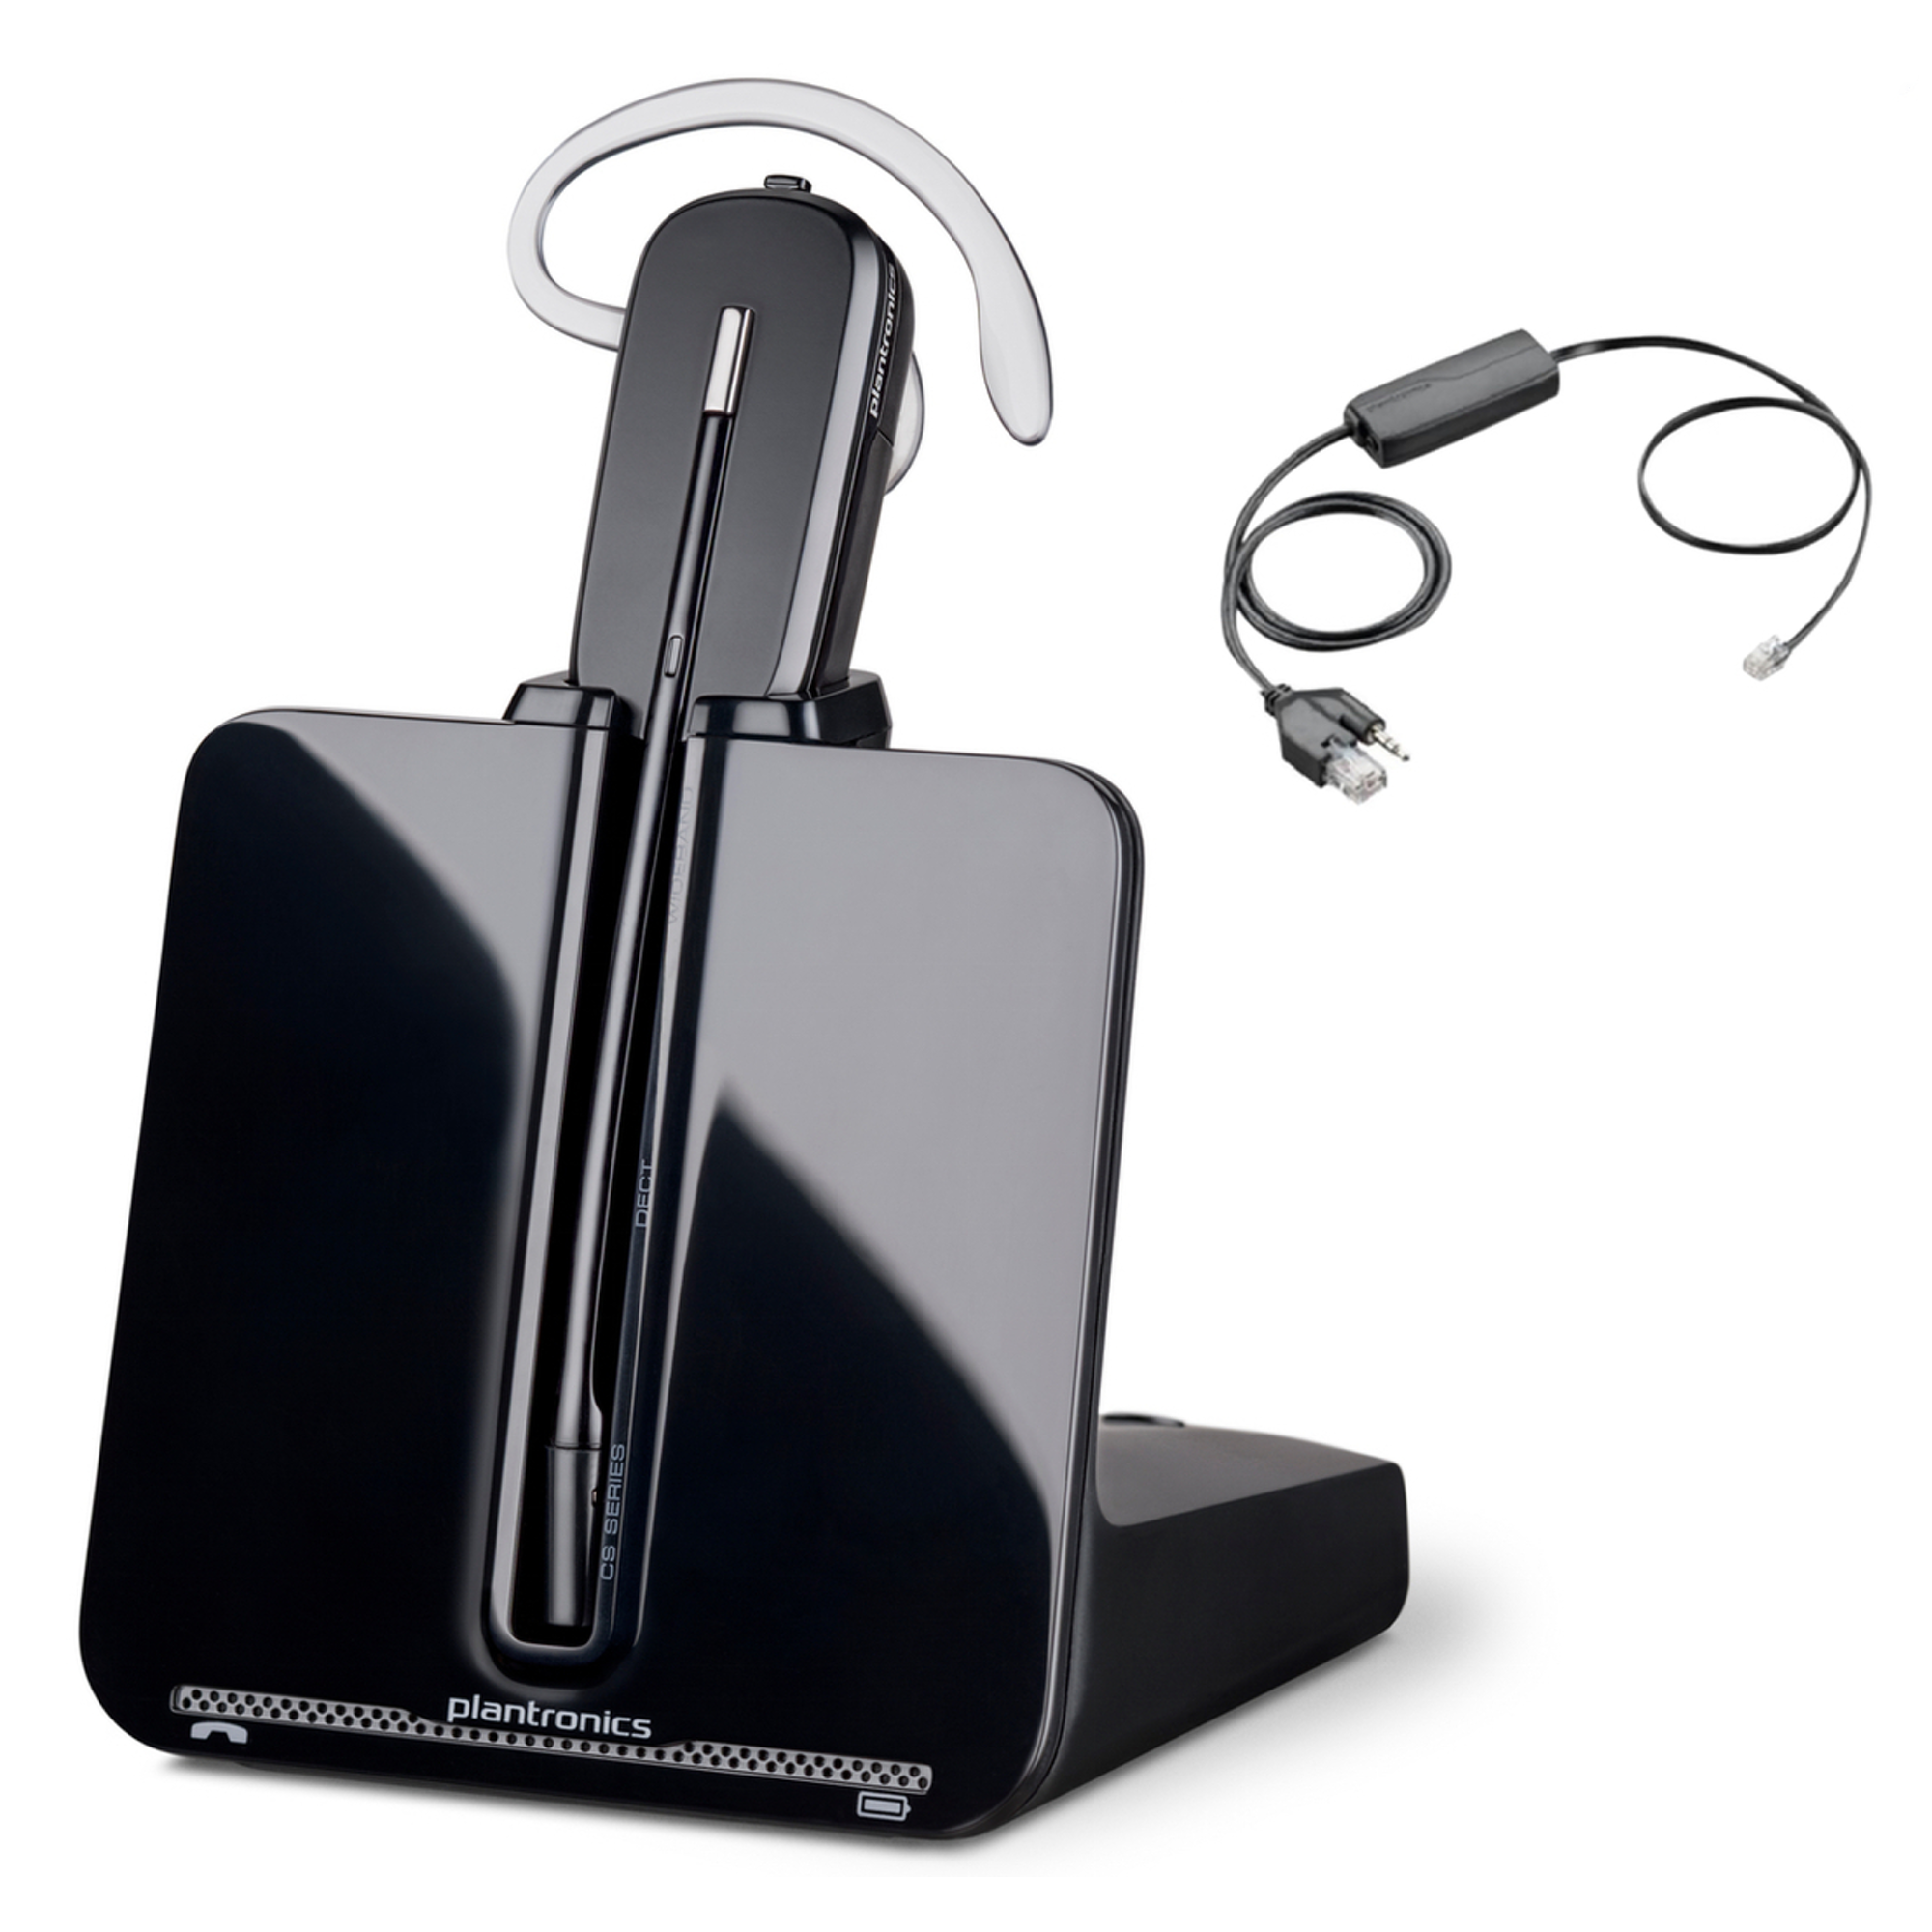 Avaya Compatible Plantronics VoIP Wireless Headset Bundle with Electronic Remote Answerer (EHS) included - image 1 of 6